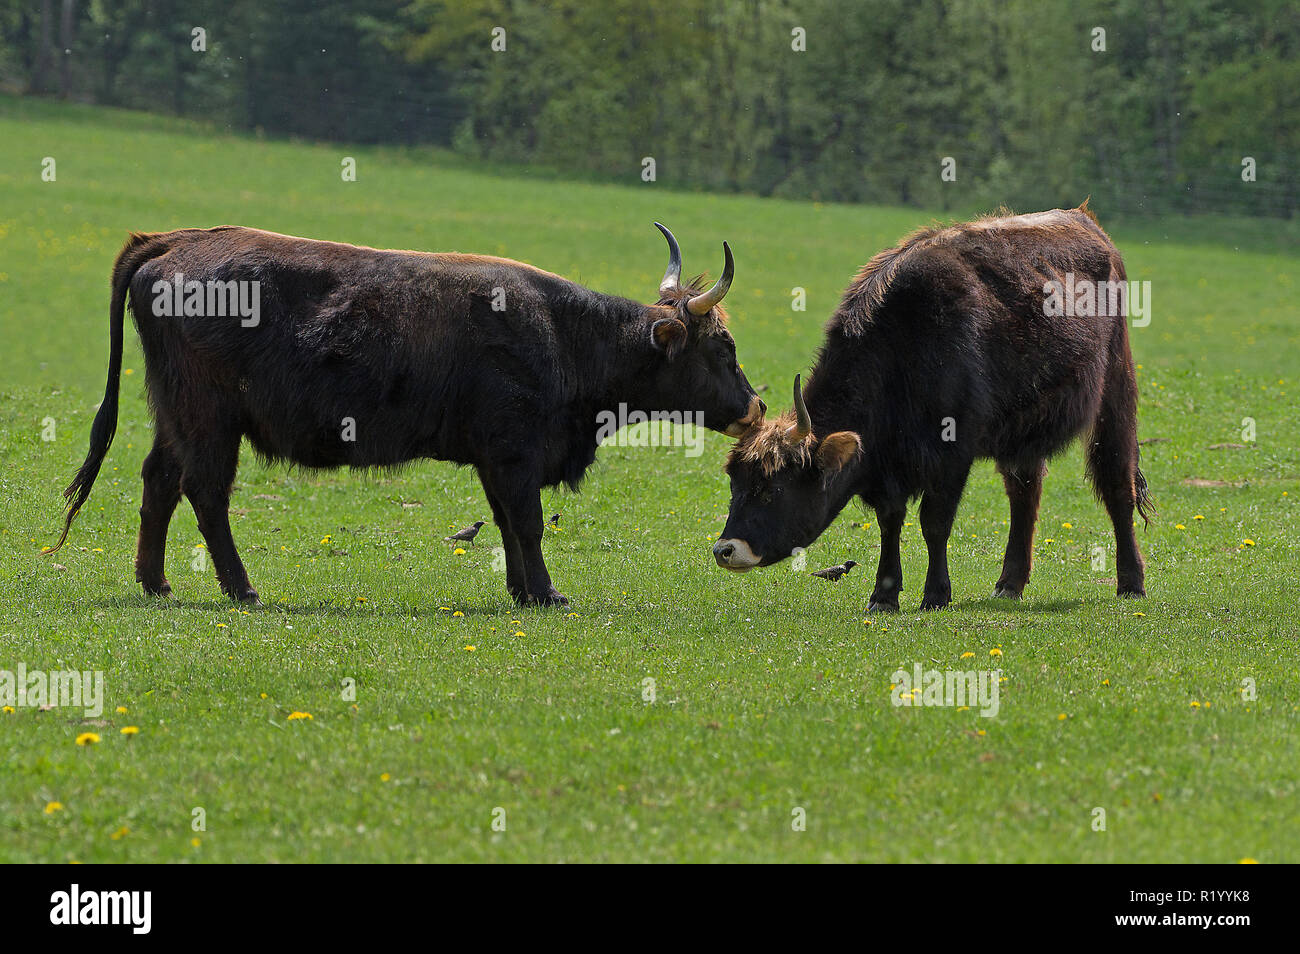 Recreated Aurochs, Heck Cattle (Bos primigenius primigenius). Two cows on a meadow, one grooming the other. Germany Stock Photo